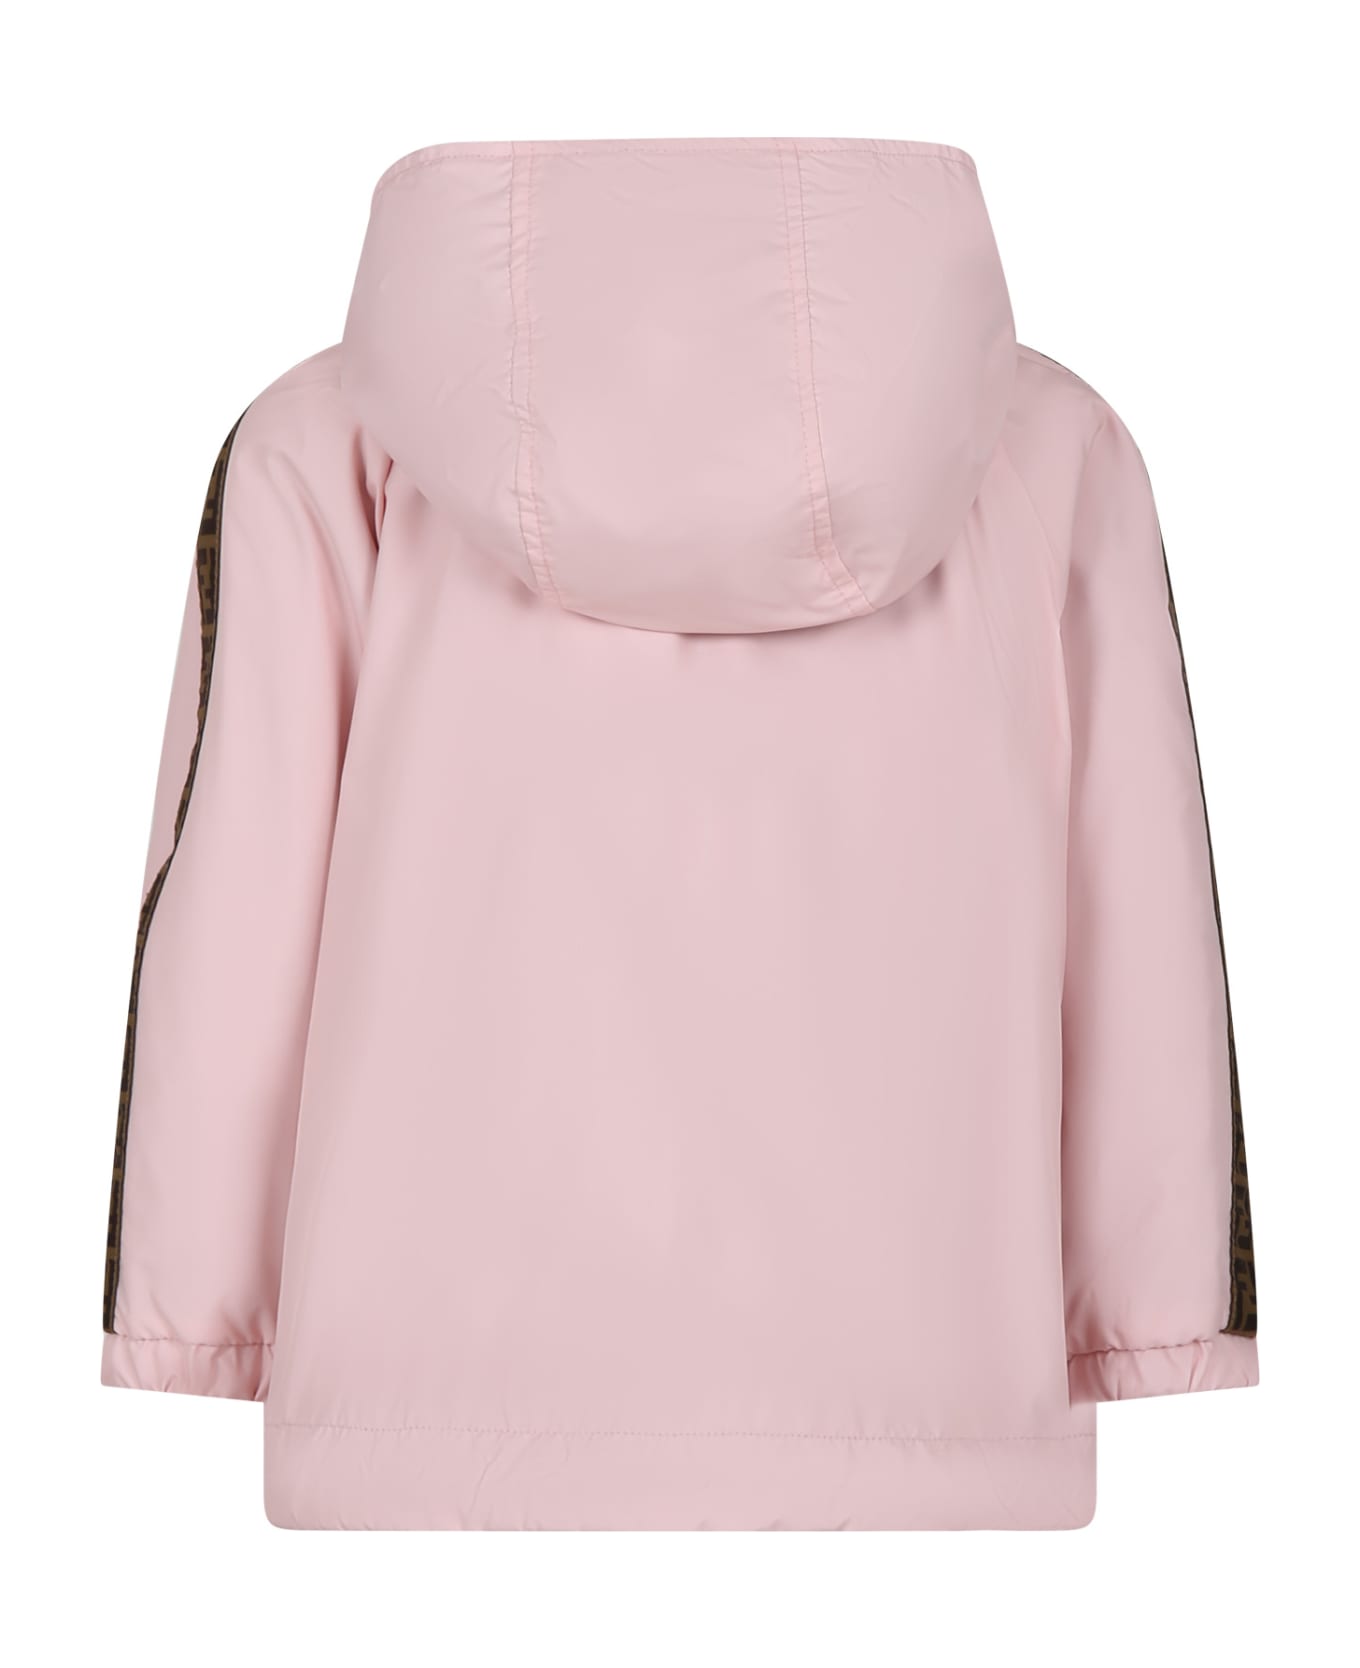 Fendi Reversible Pink Windbreaker For Girl With Iconic Ff - Pink コート＆ジャケット